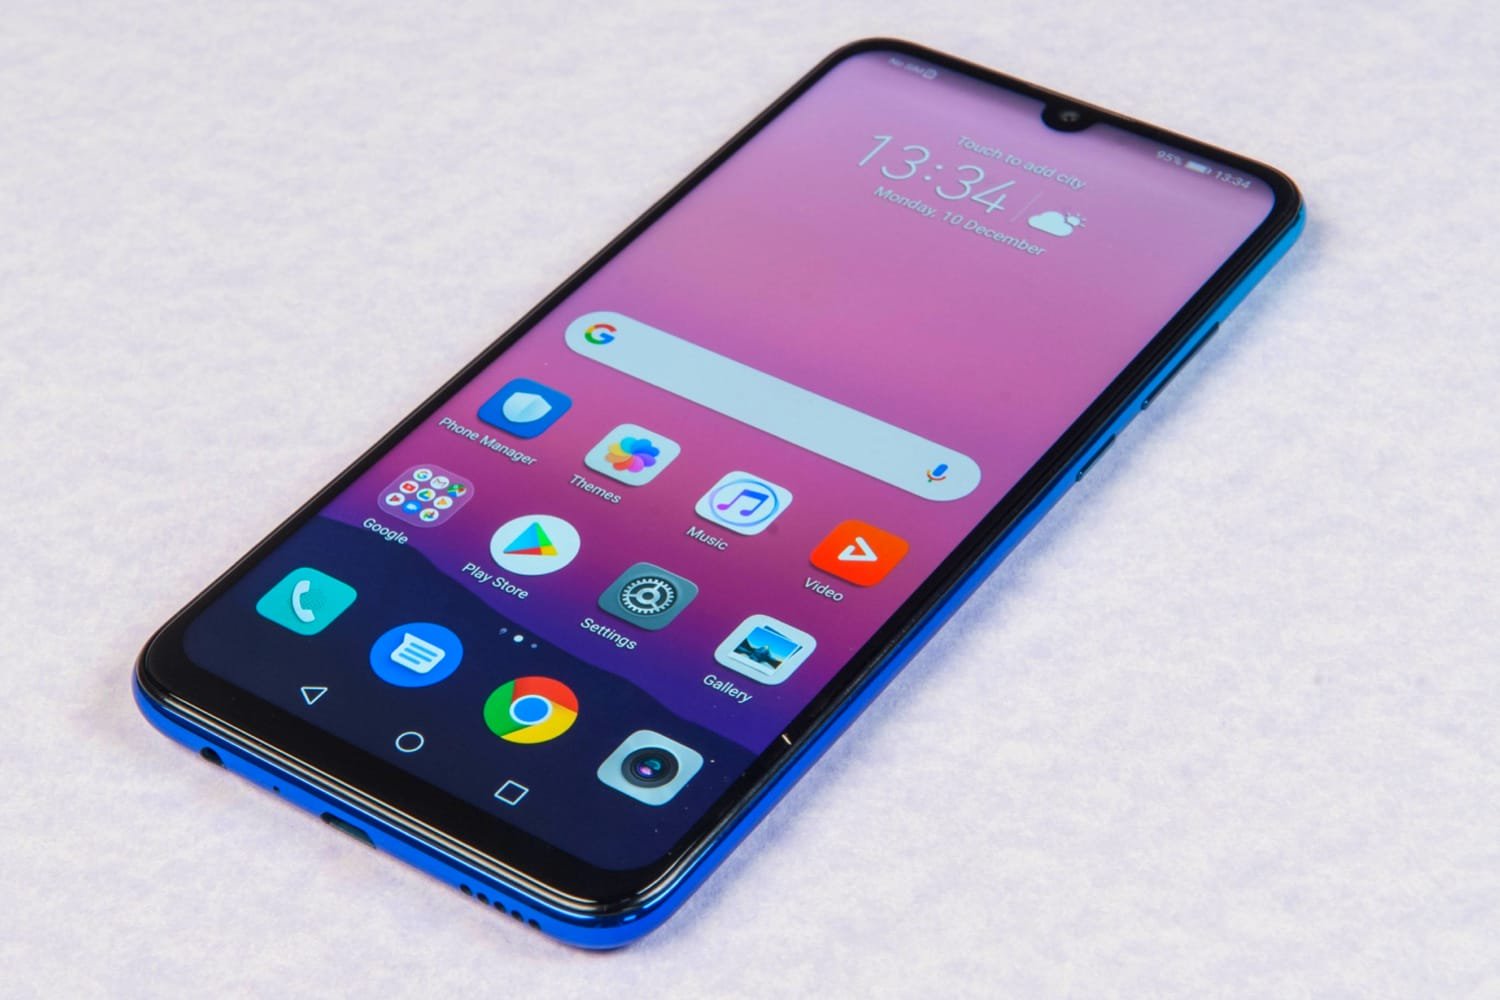 Overview of the main characteristics of the smartphone Huawei P smart 2020